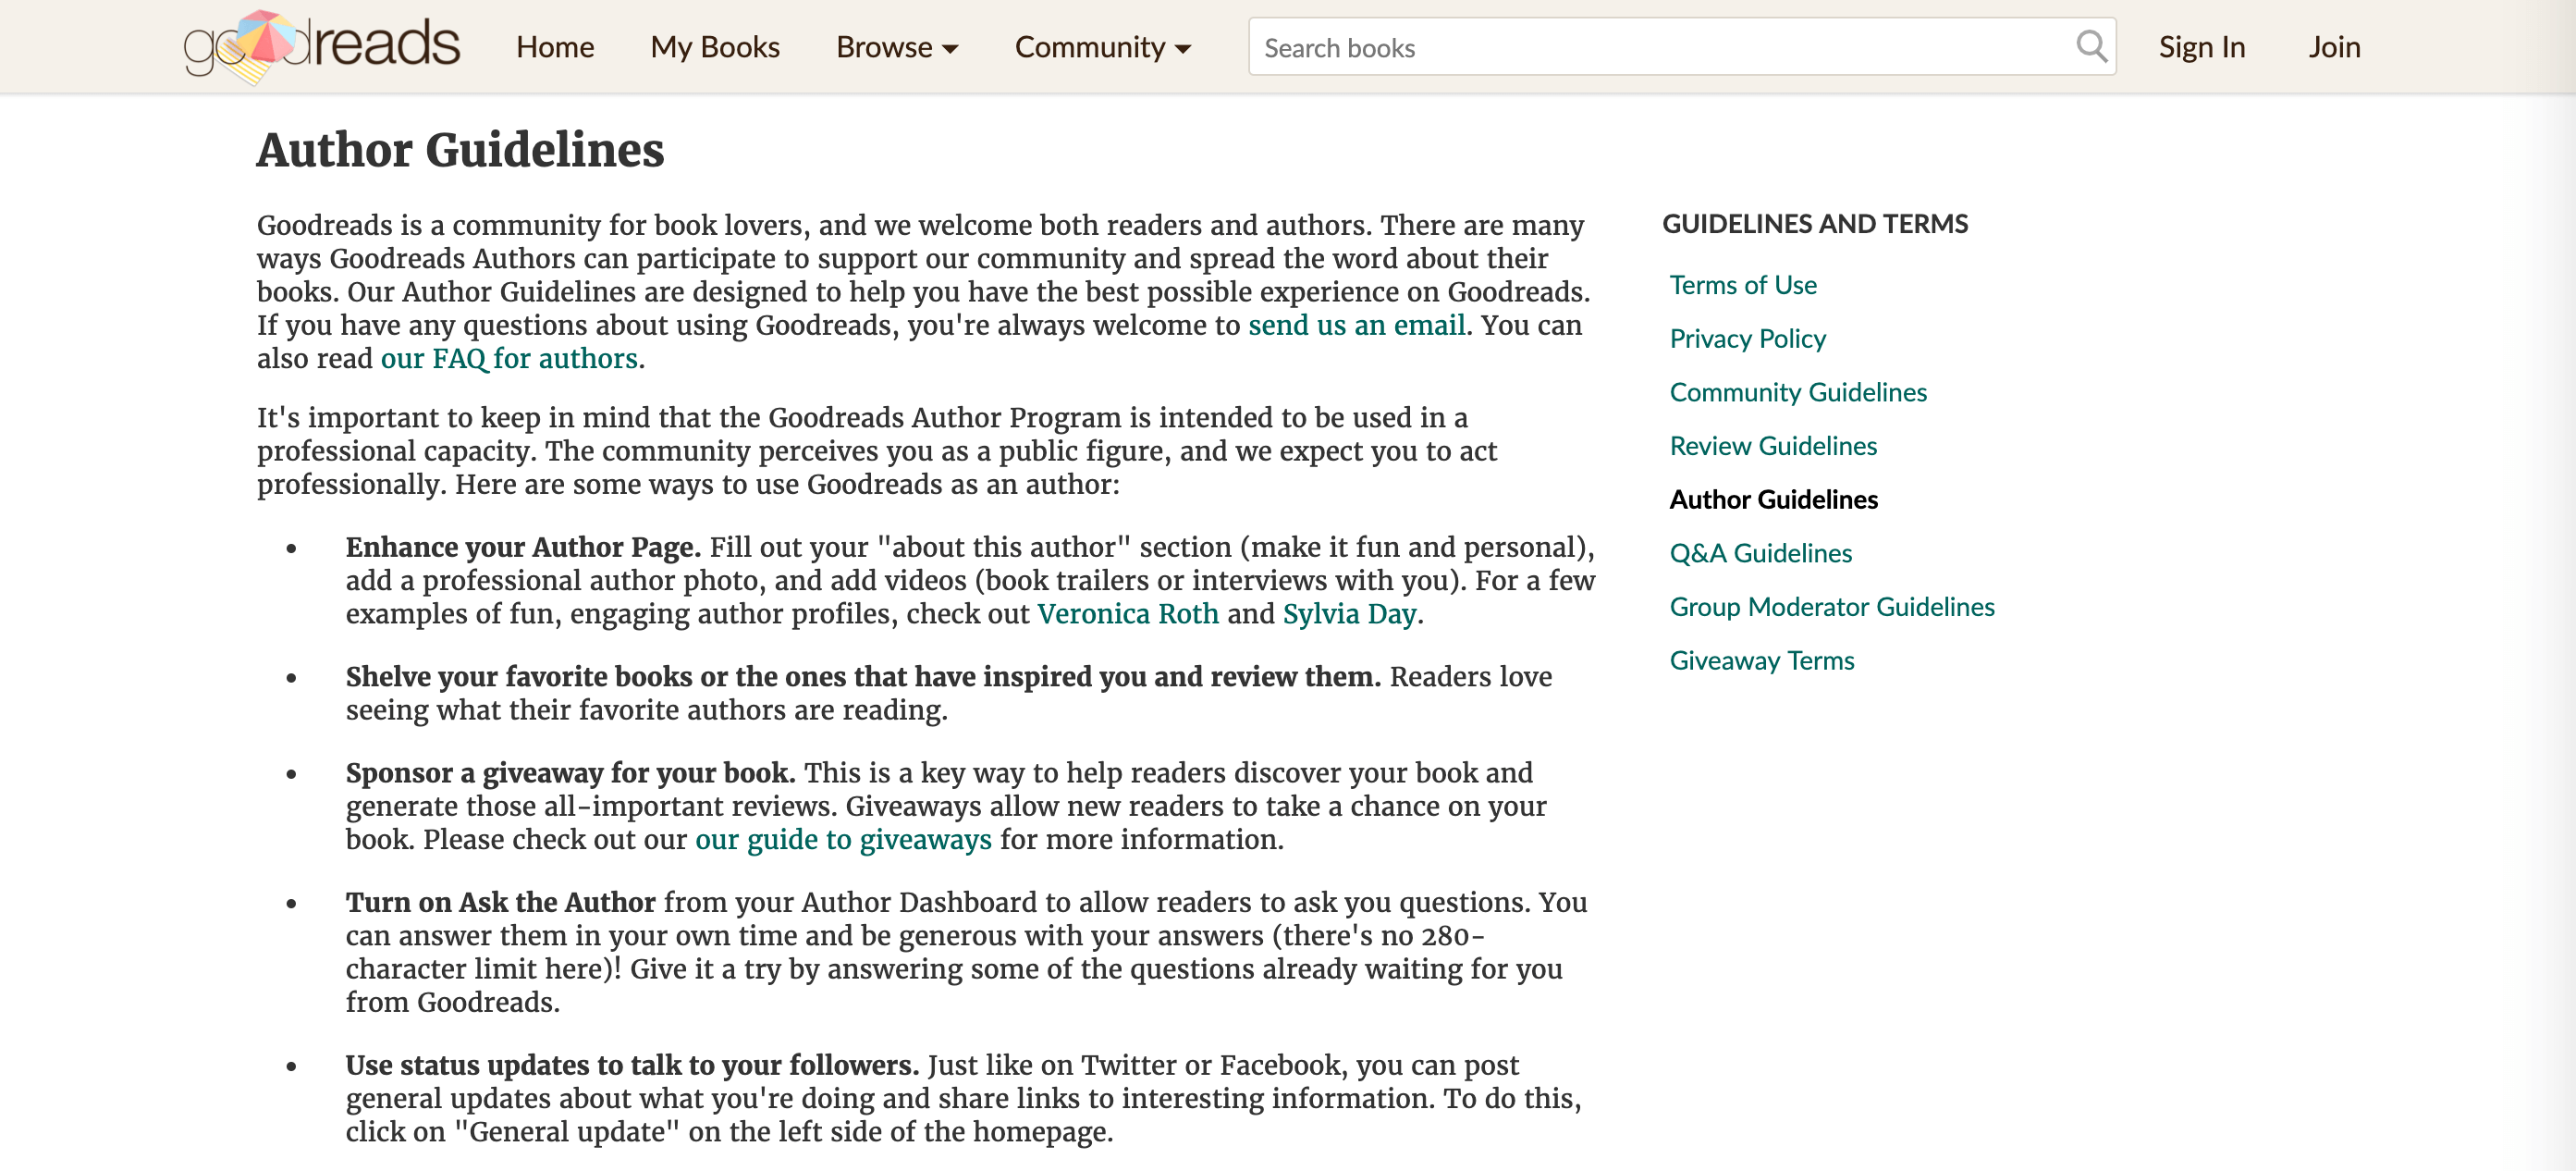 The GoodReads Author Guidelines.